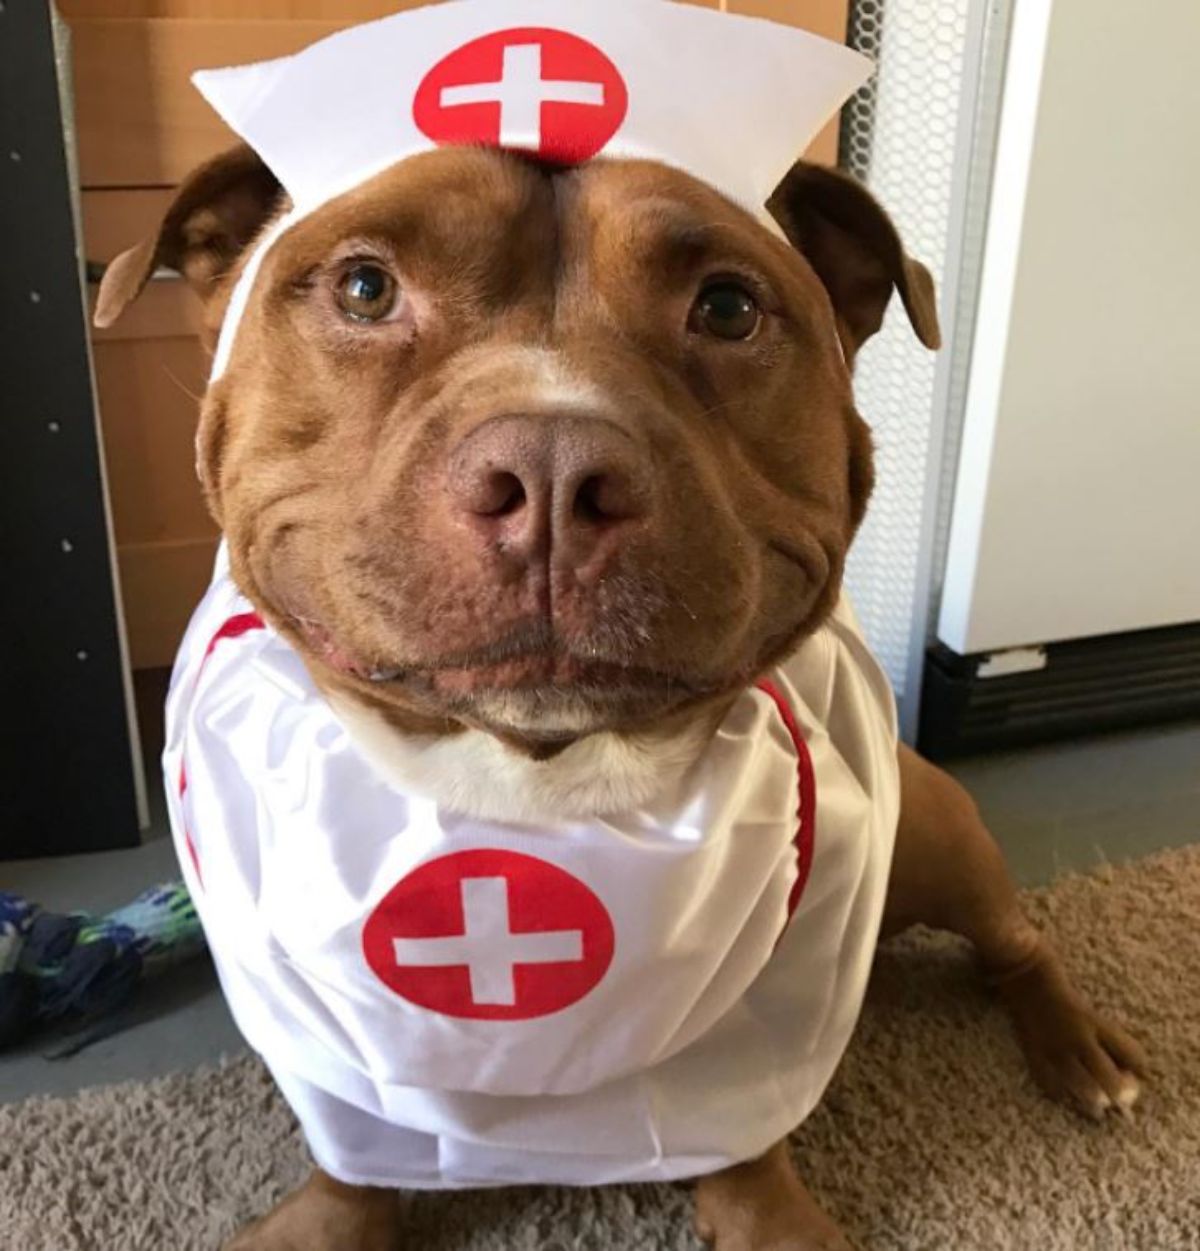 smiling brown and white pitbull wearing a white shirt and hat with a red and white cross